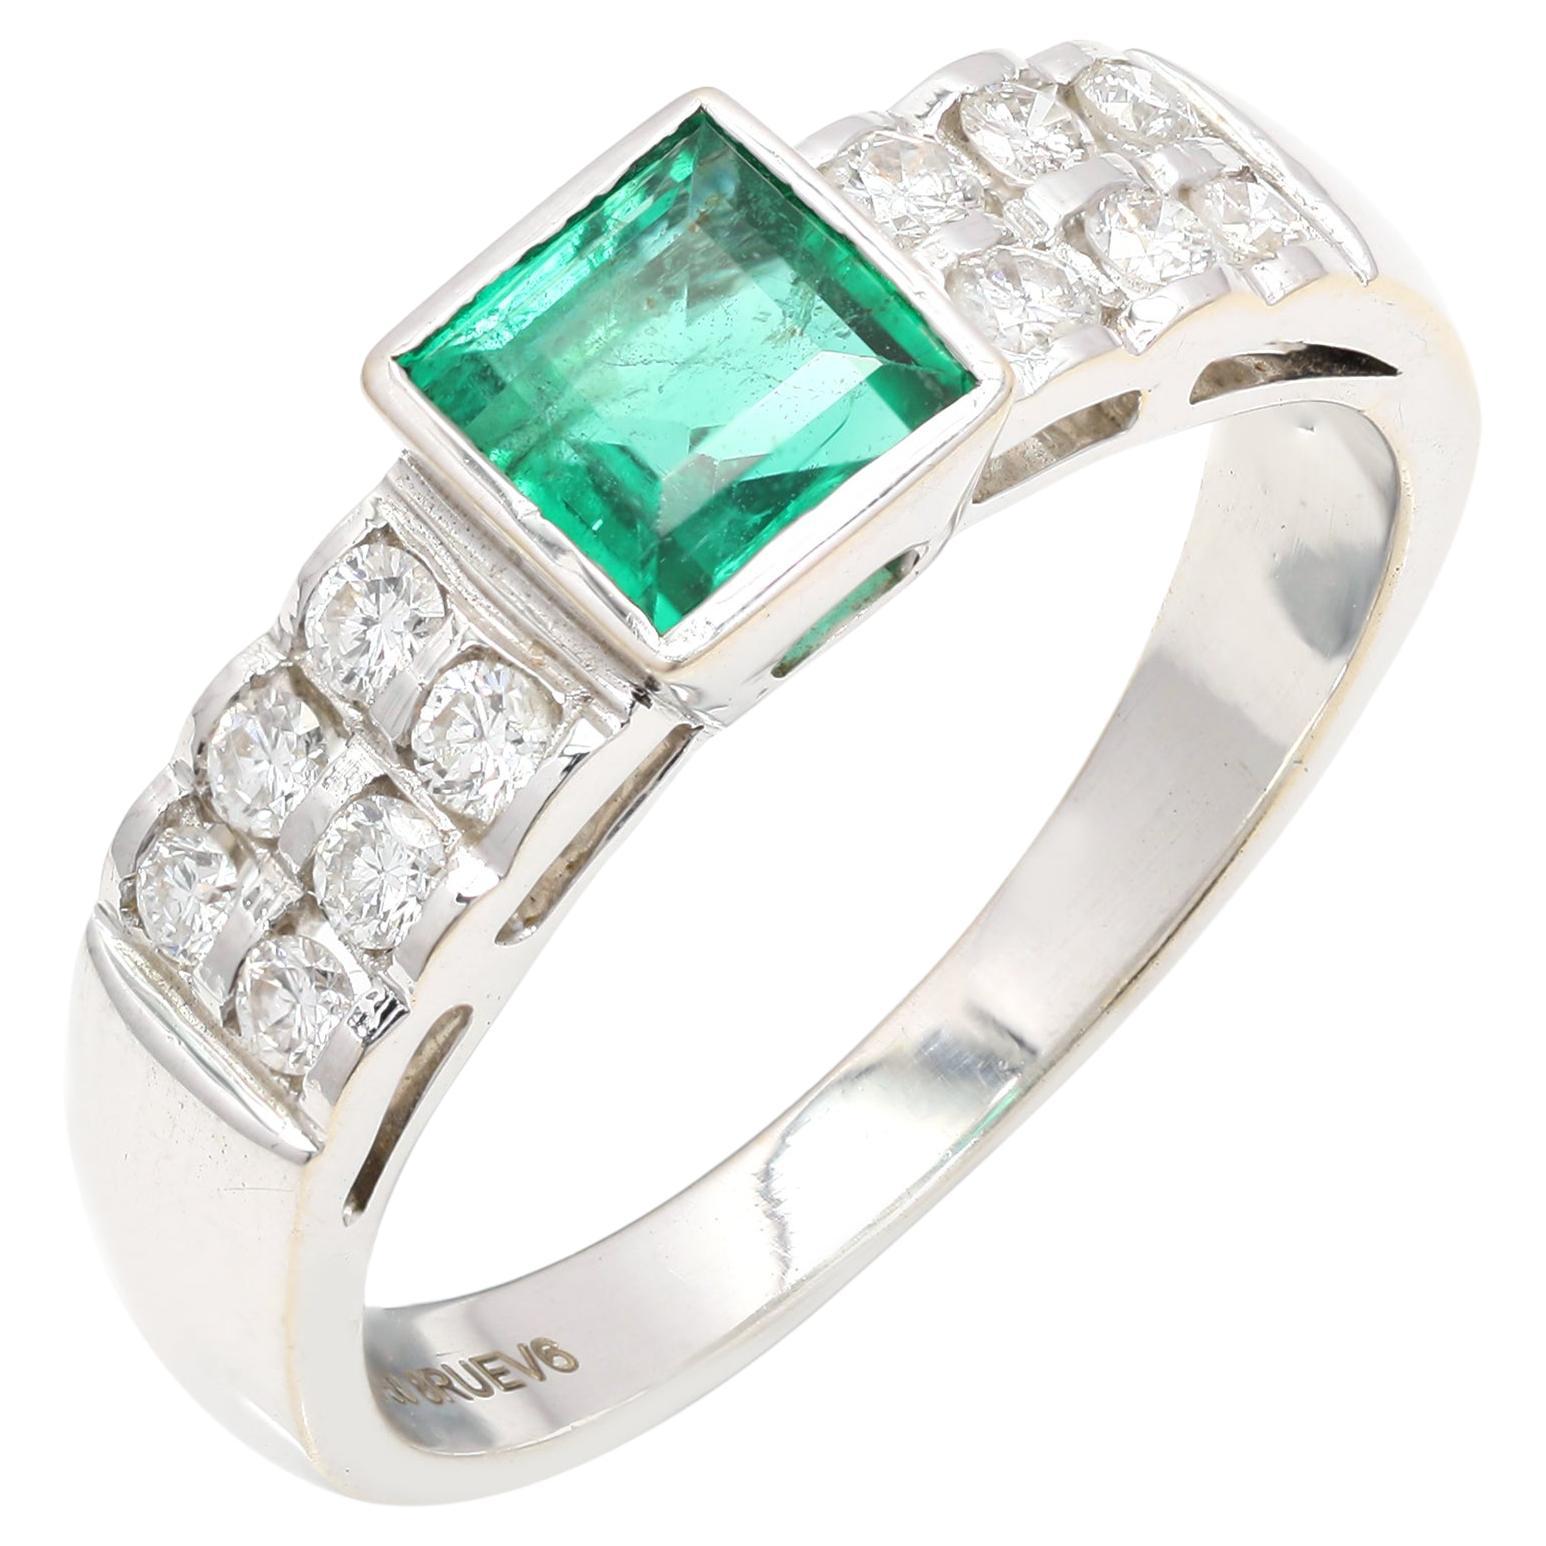 For Sale:  Unisex Diamond and Emerald Wedding Band Ring in 18k White Gold for Men